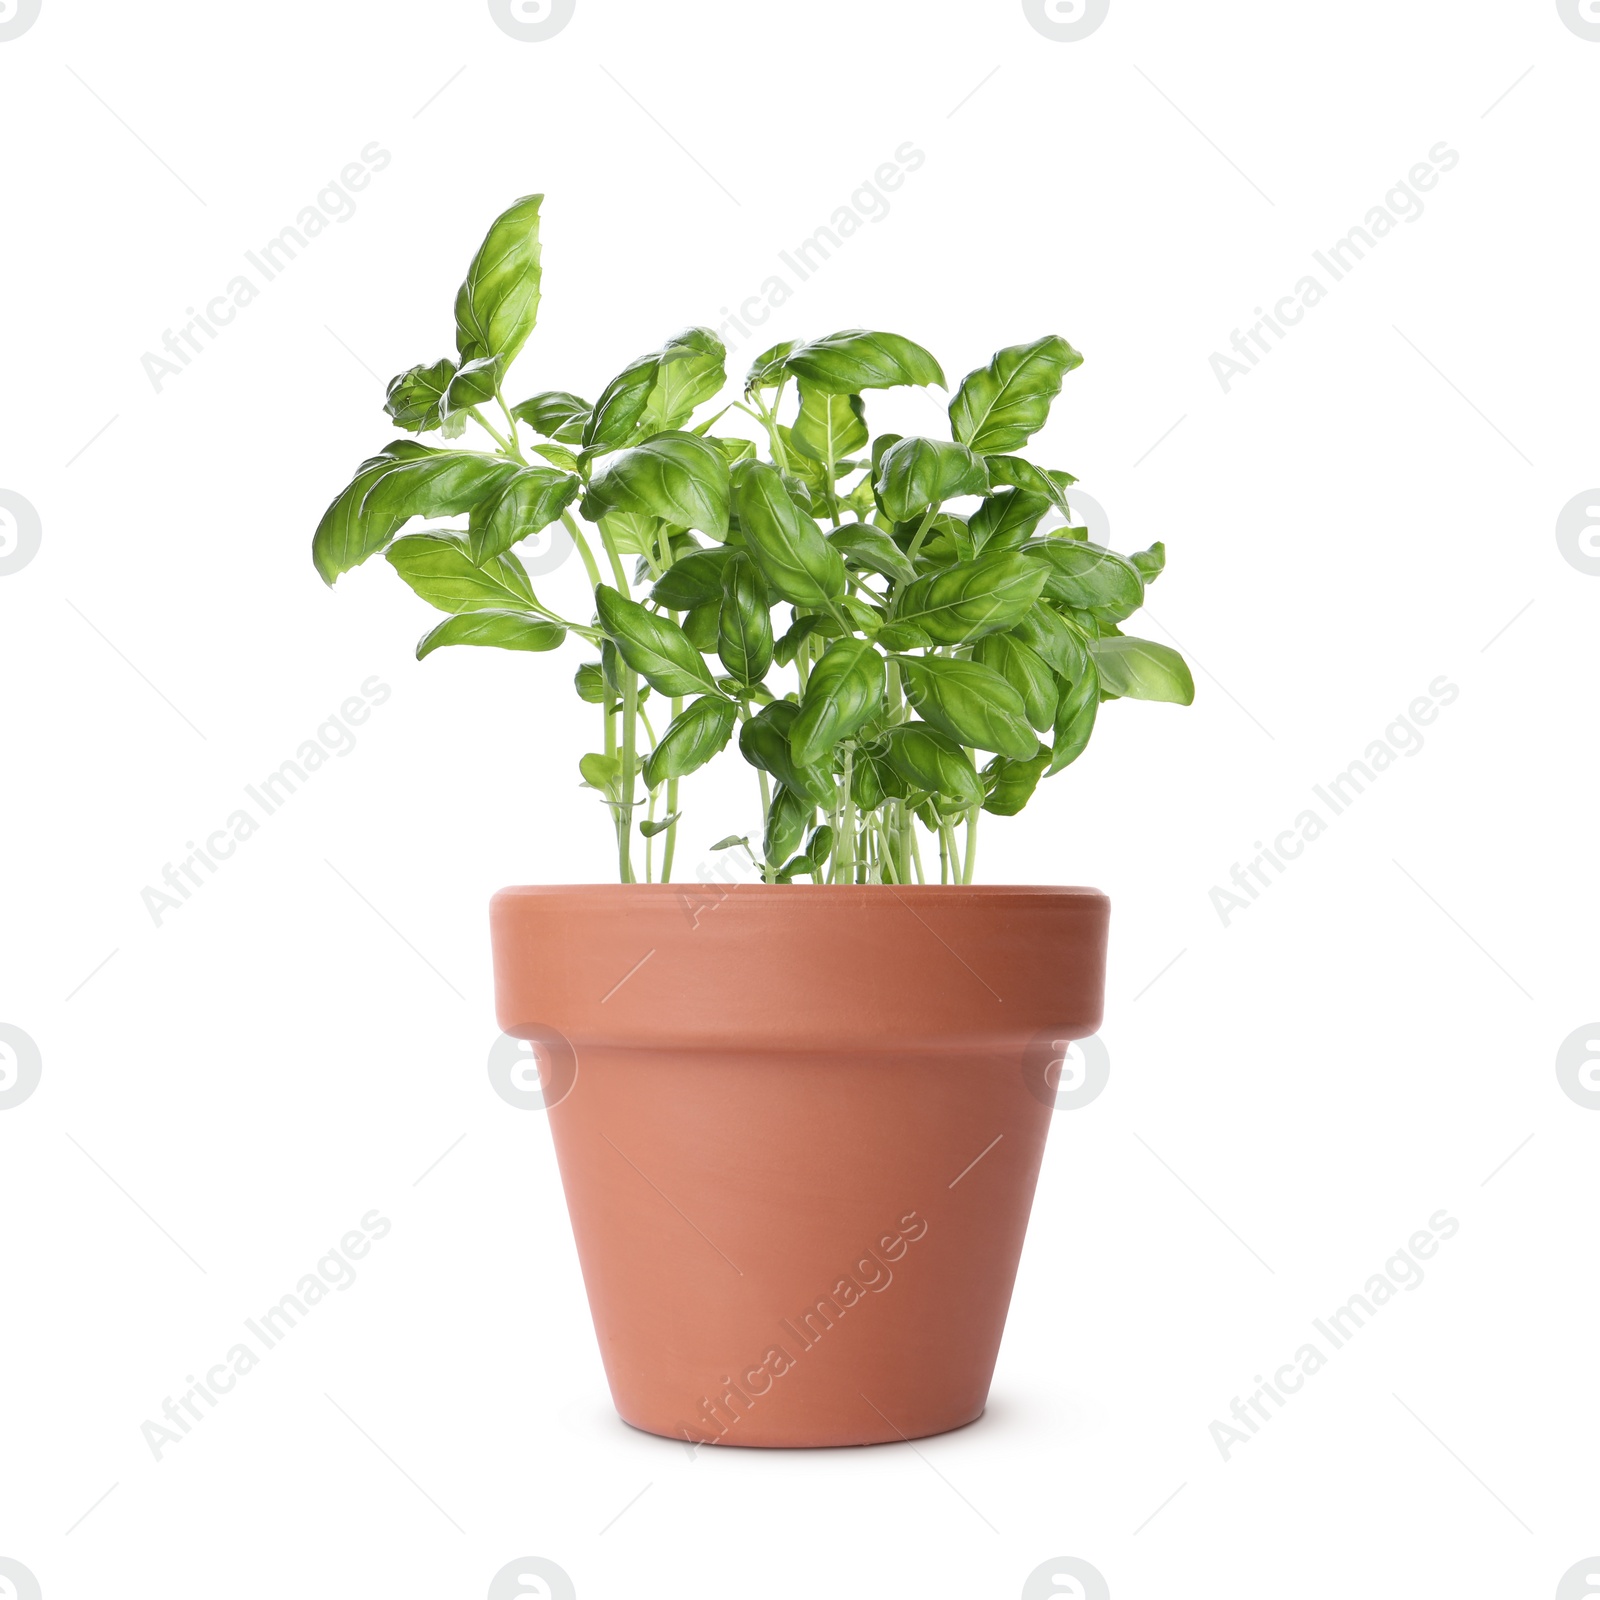 Image of Green basil in clay pot isolated on white